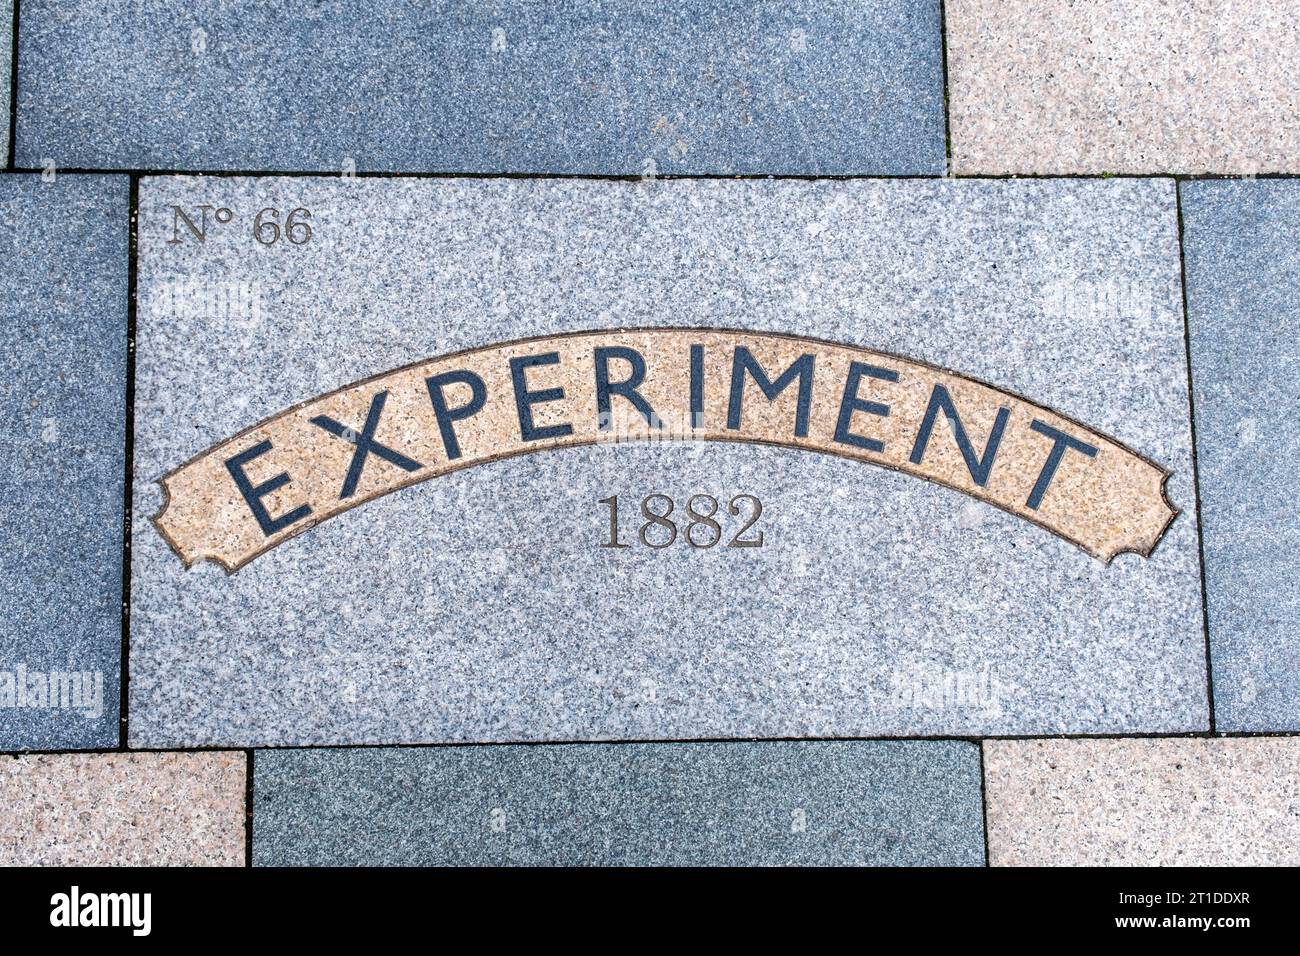 Paving slab in West Street Crewe saying Experiment, train build at Crewe Works No 66 in 1882 Stock Photo